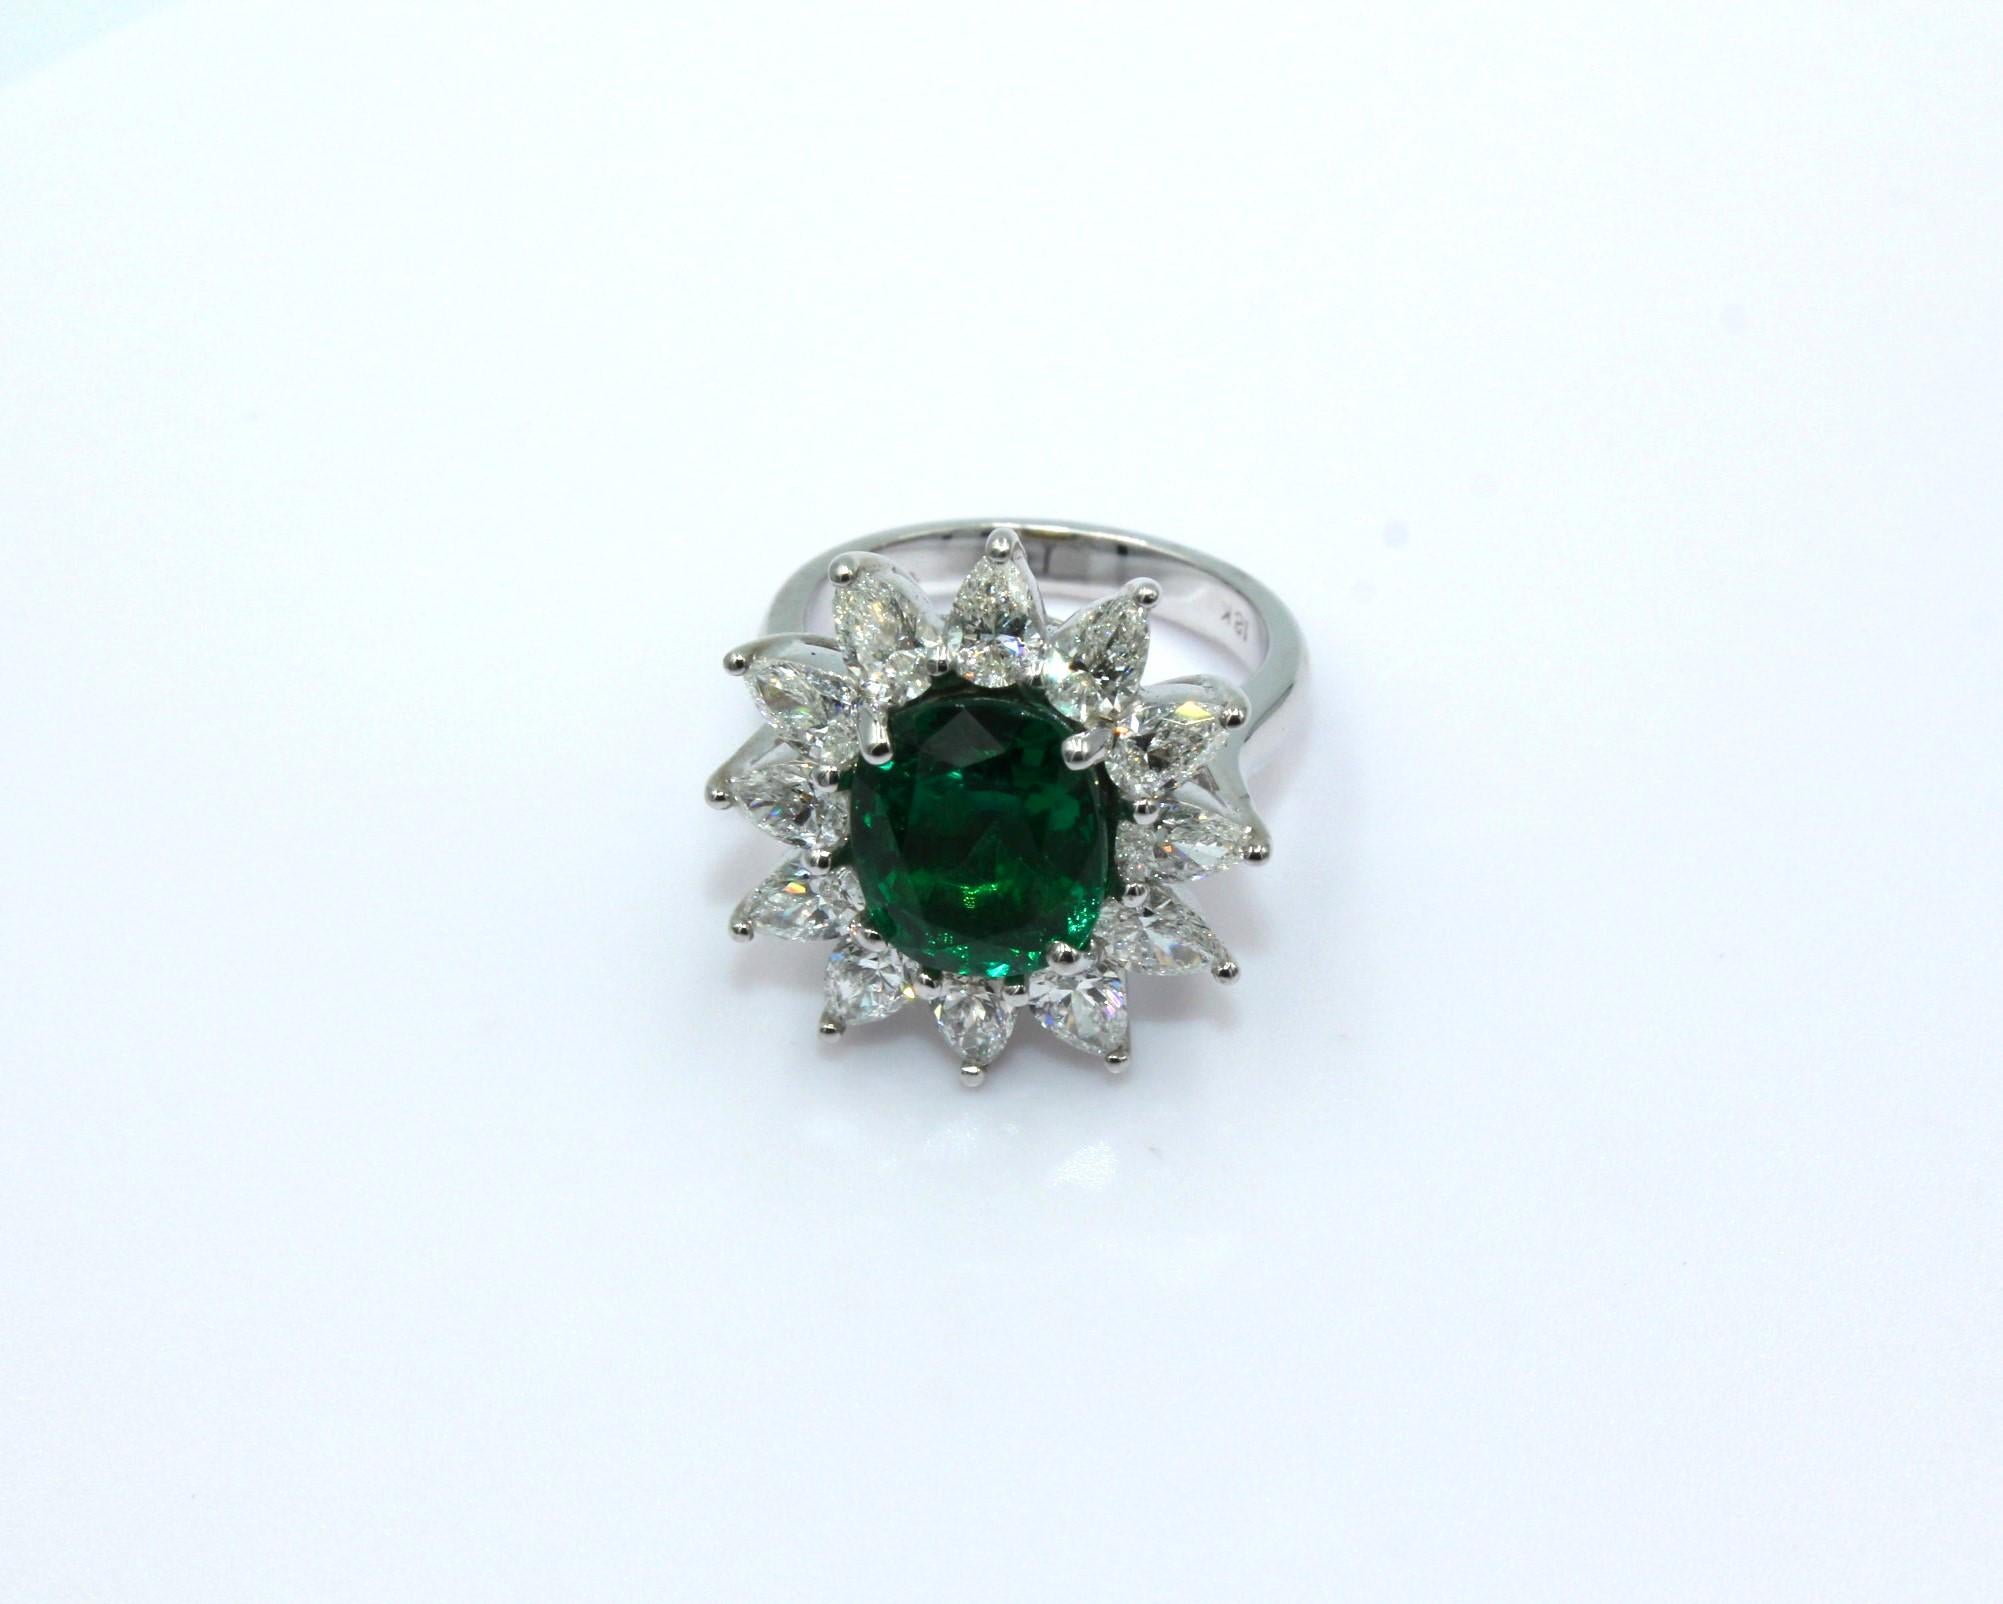 3.54 Carats Cushion Zambian Emerald and twelve 0.1991 Carats Pear Shaped Diamonds.

The perfect statement piece to highlight your unique elegant taste for fine jewelry.

*Lab Certificate is available upon request*

Item Details:
- Type: Ring
-